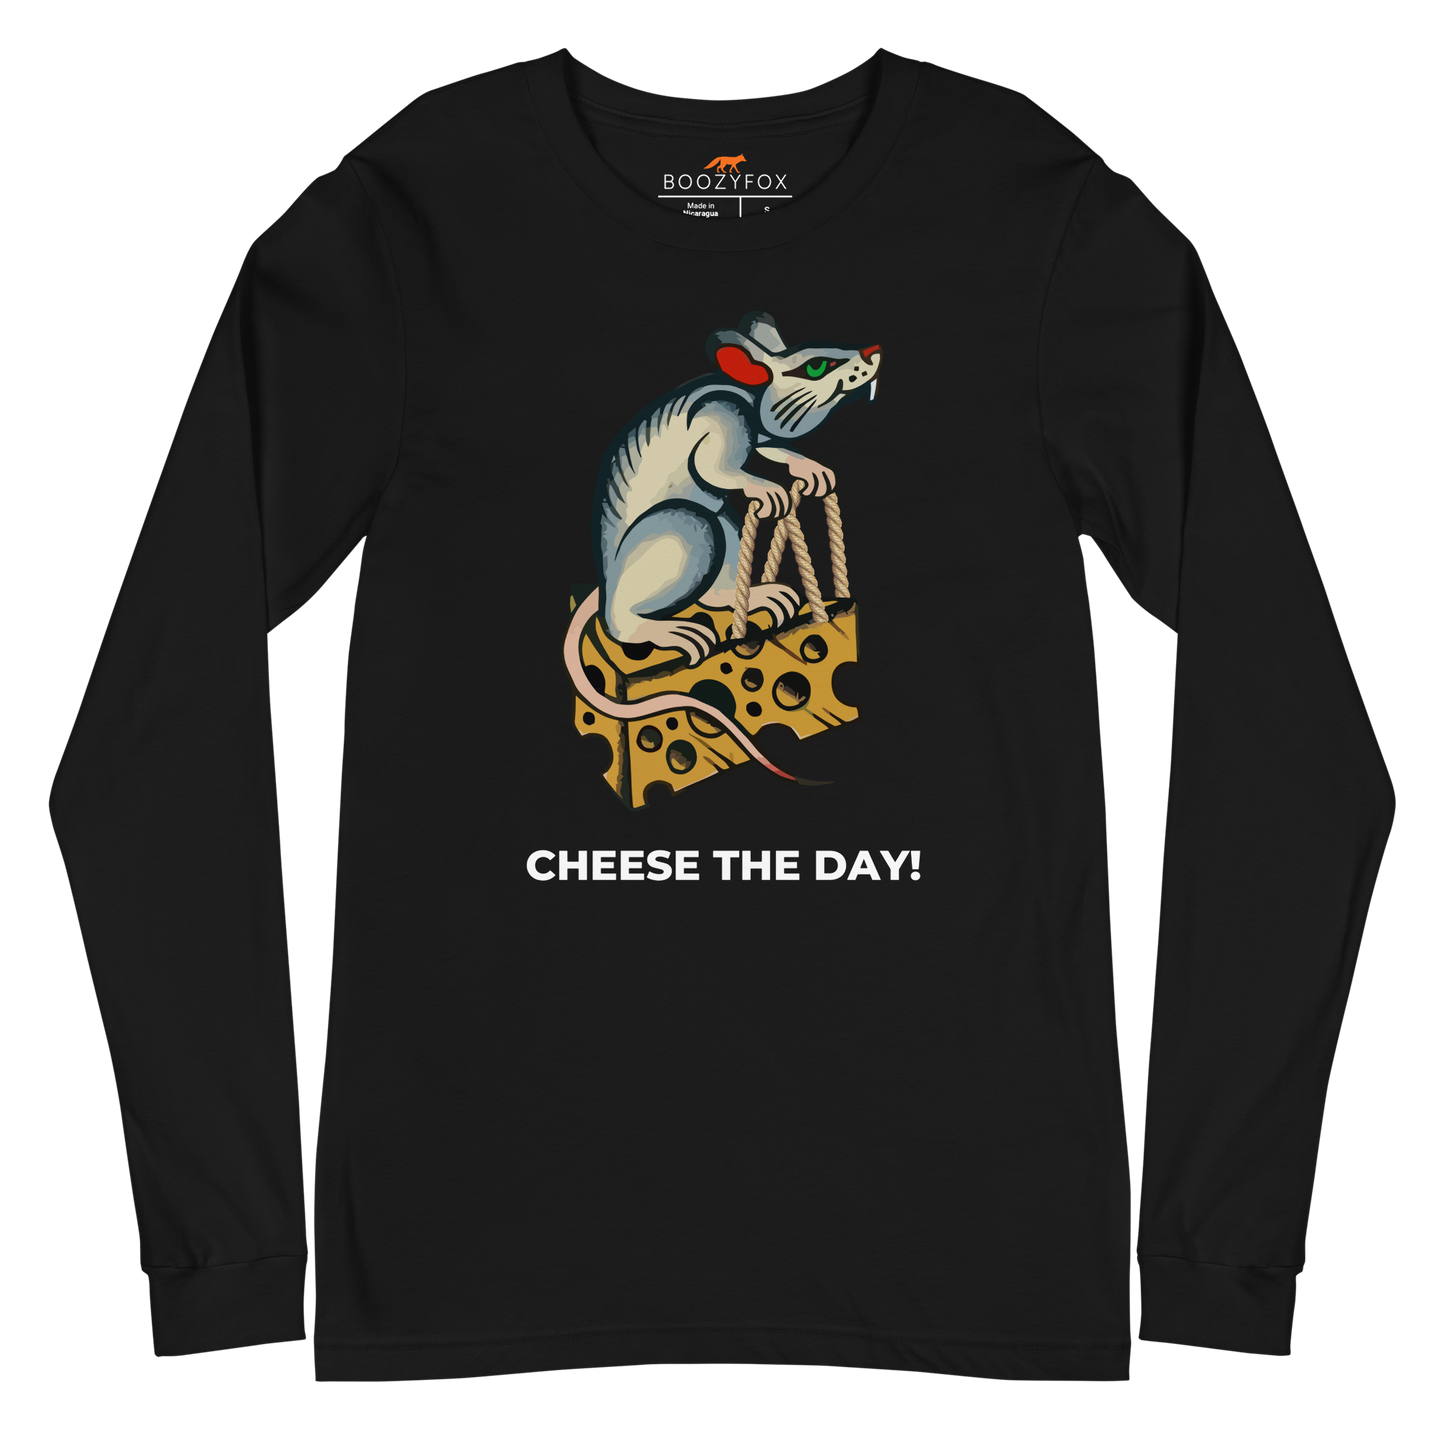 Black Rat Long Sleeve Tee featuring a hilarious Cheese The Day graphic on the chest - Funny Rat Long Sleeve Graphic Tees - Boozy Fox